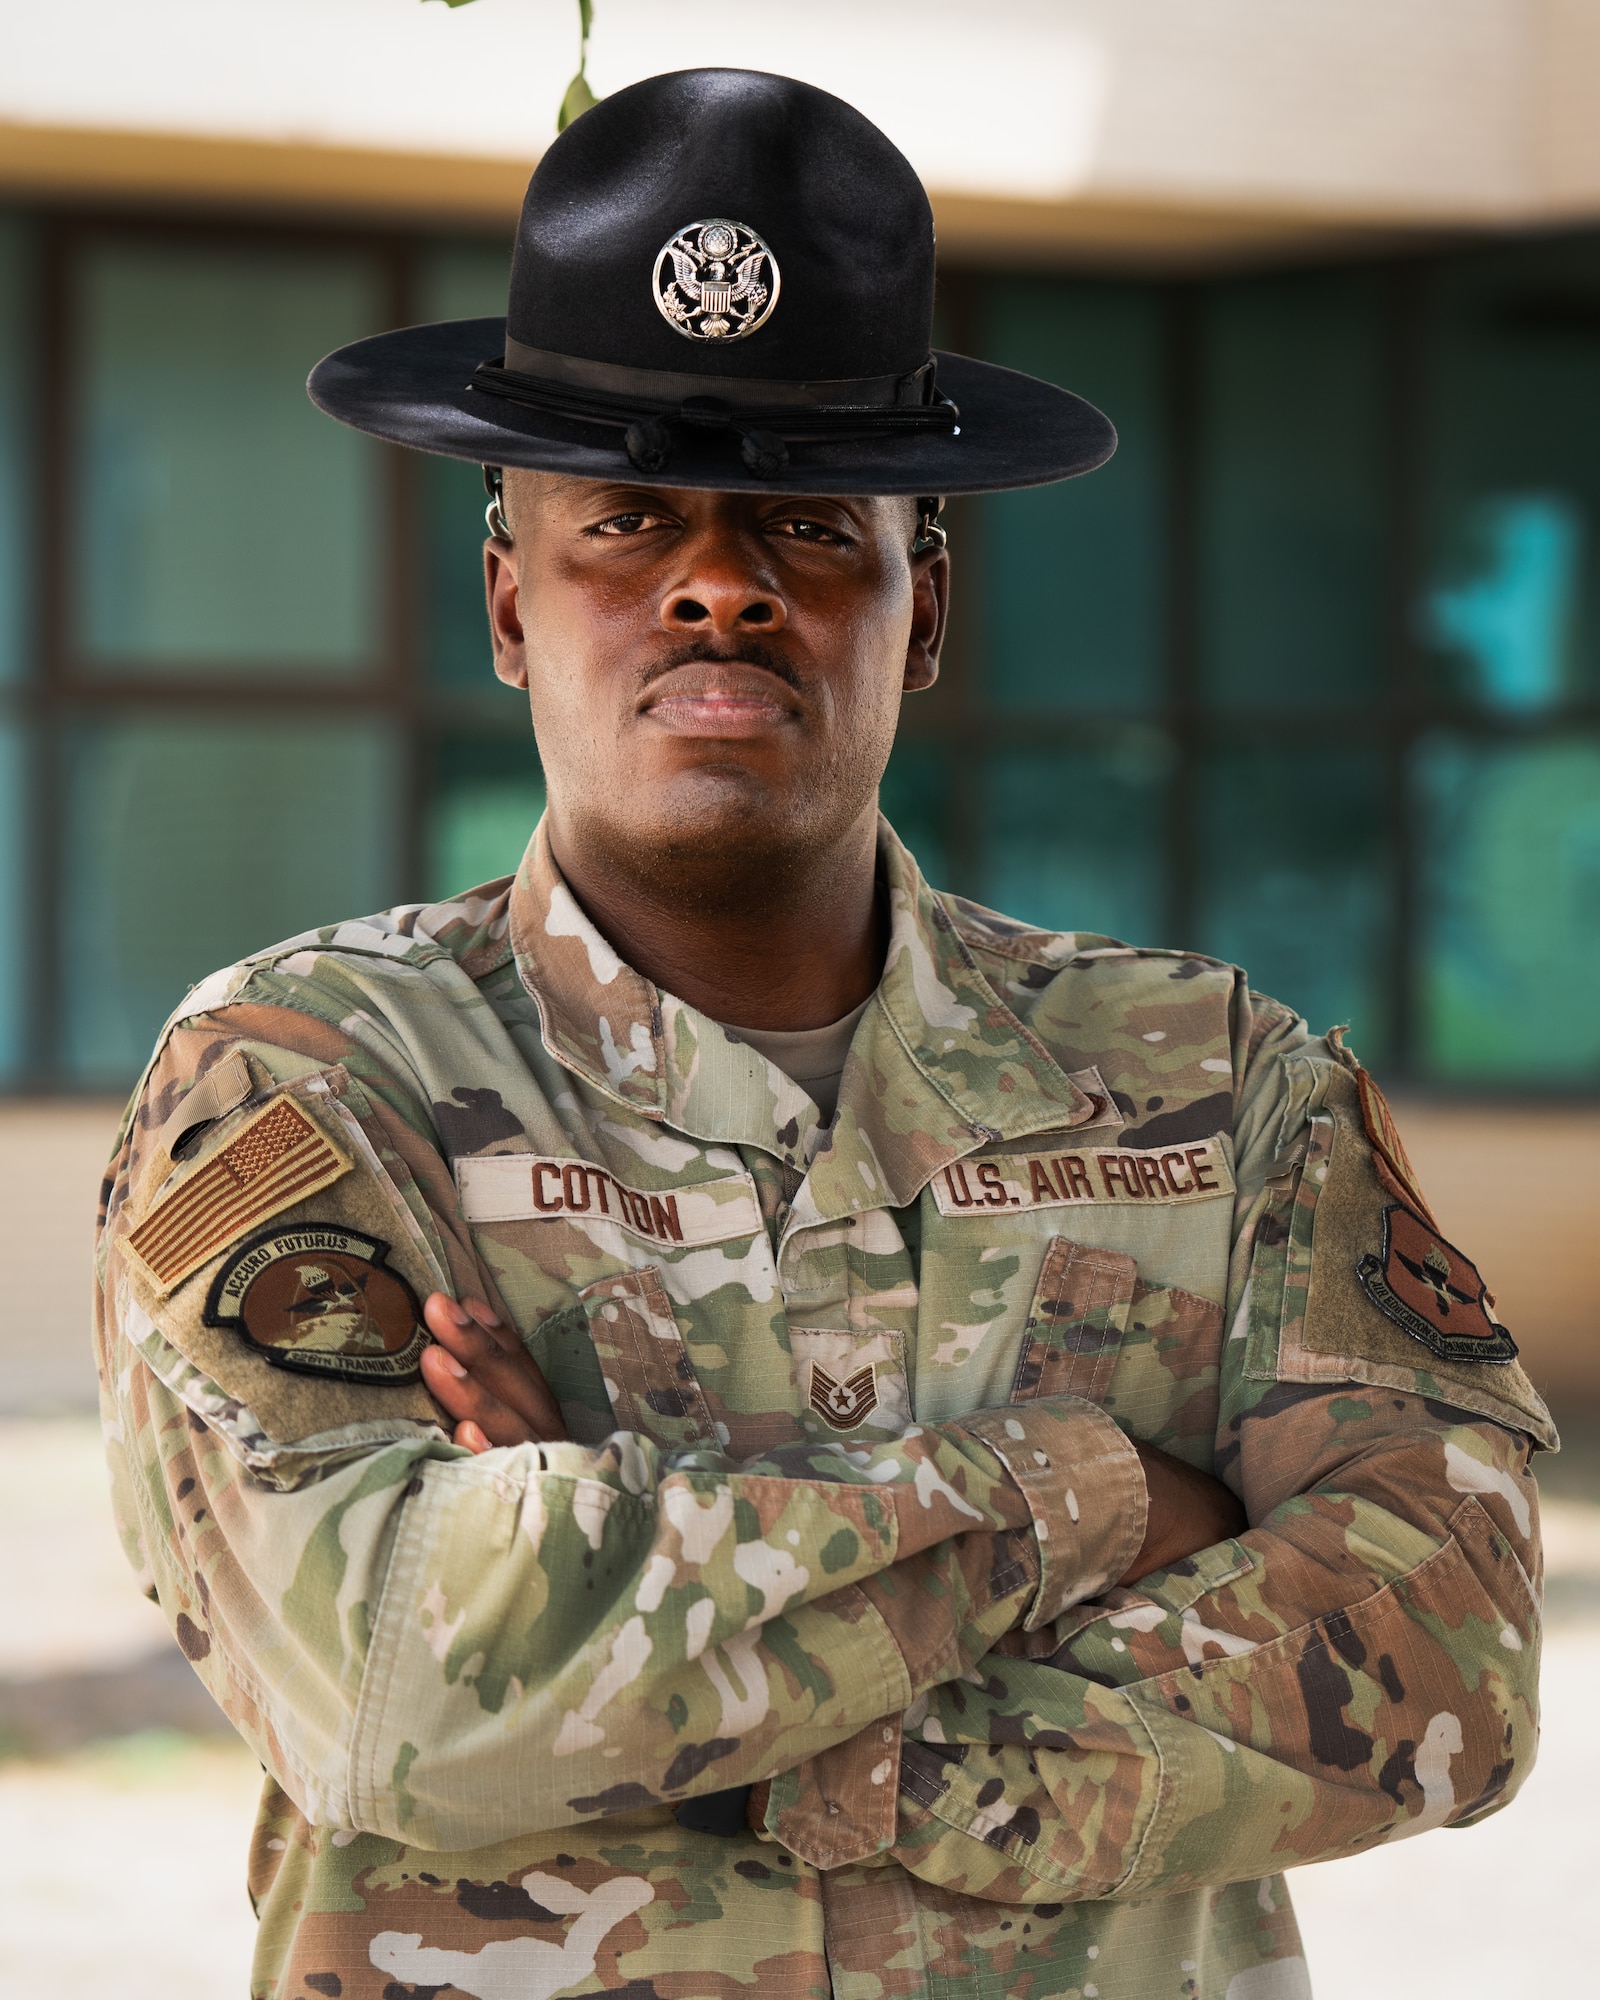 Tech. Sgt. Nigel Cotton, 326th Training Squadron military training instructor trainer, poses for a photo, Aug. 31, 2023, at Joint Base San Antonio-Lackland, Texas. In the resilience issue of Airman Magazine, Cotton shared the challenges he faced while acclimating to the new environment and the experience he had seeking mental health services from the military consult service. (U.S. Air Force photo by Master Sgt. Christopher Griffin)